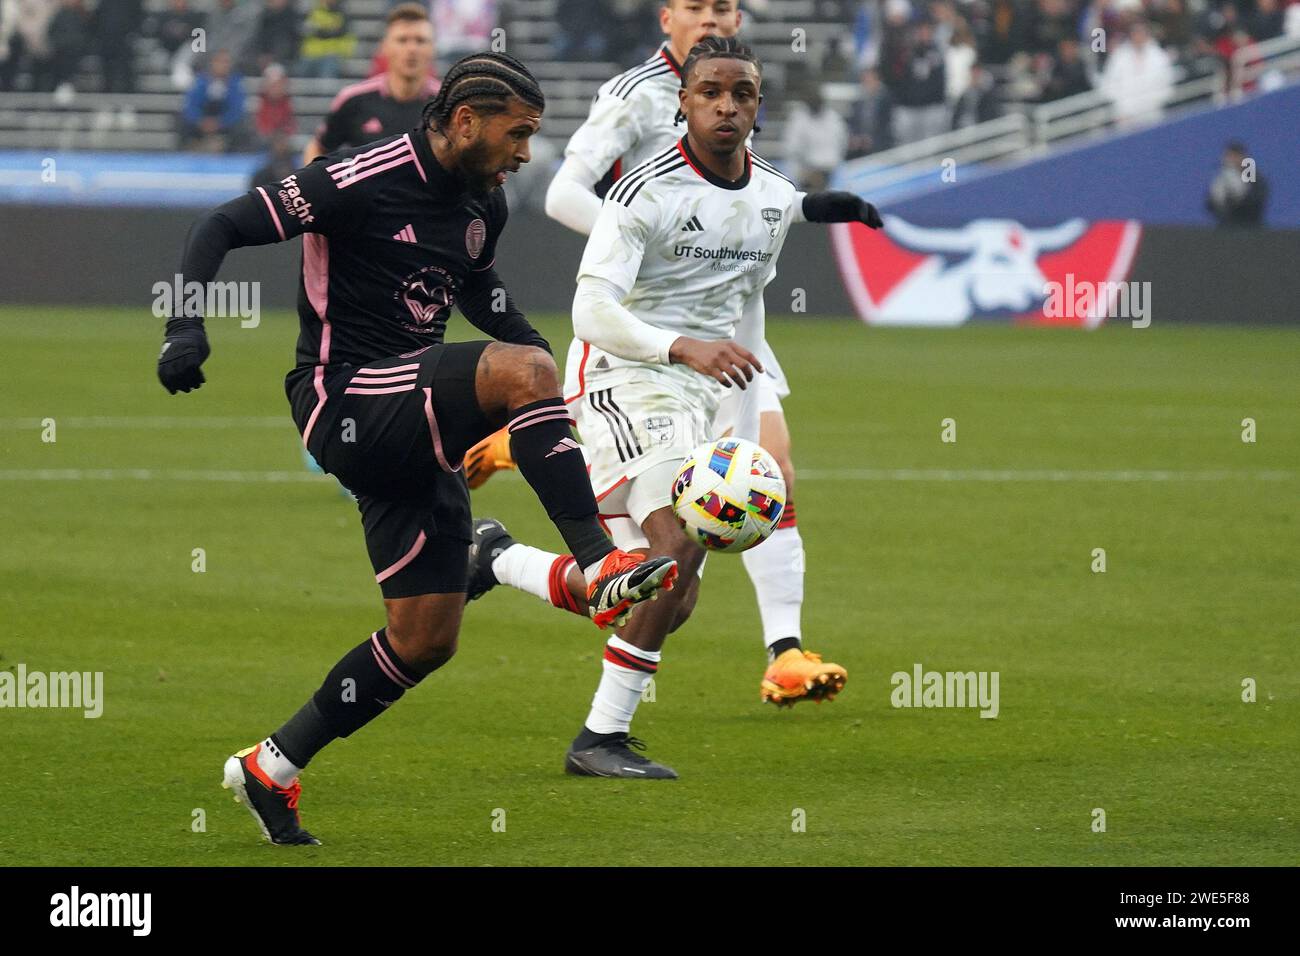 Dallas, USA. 22nd Jan, 2024. January 22, 2024, Dallas, Texas, USA: Miami defender DeAndre Yedlin (R) in action during the MLS preseason game between FC Dallas and Inter Miami played at the Cotton Bowl on Monday January 22, 2024. in Dallas, Texas, USA (Photo by Javier Vicencio/Eyepix Group/Sipa USA) Credit: Sipa USA/Alamy Live News Stock Photo